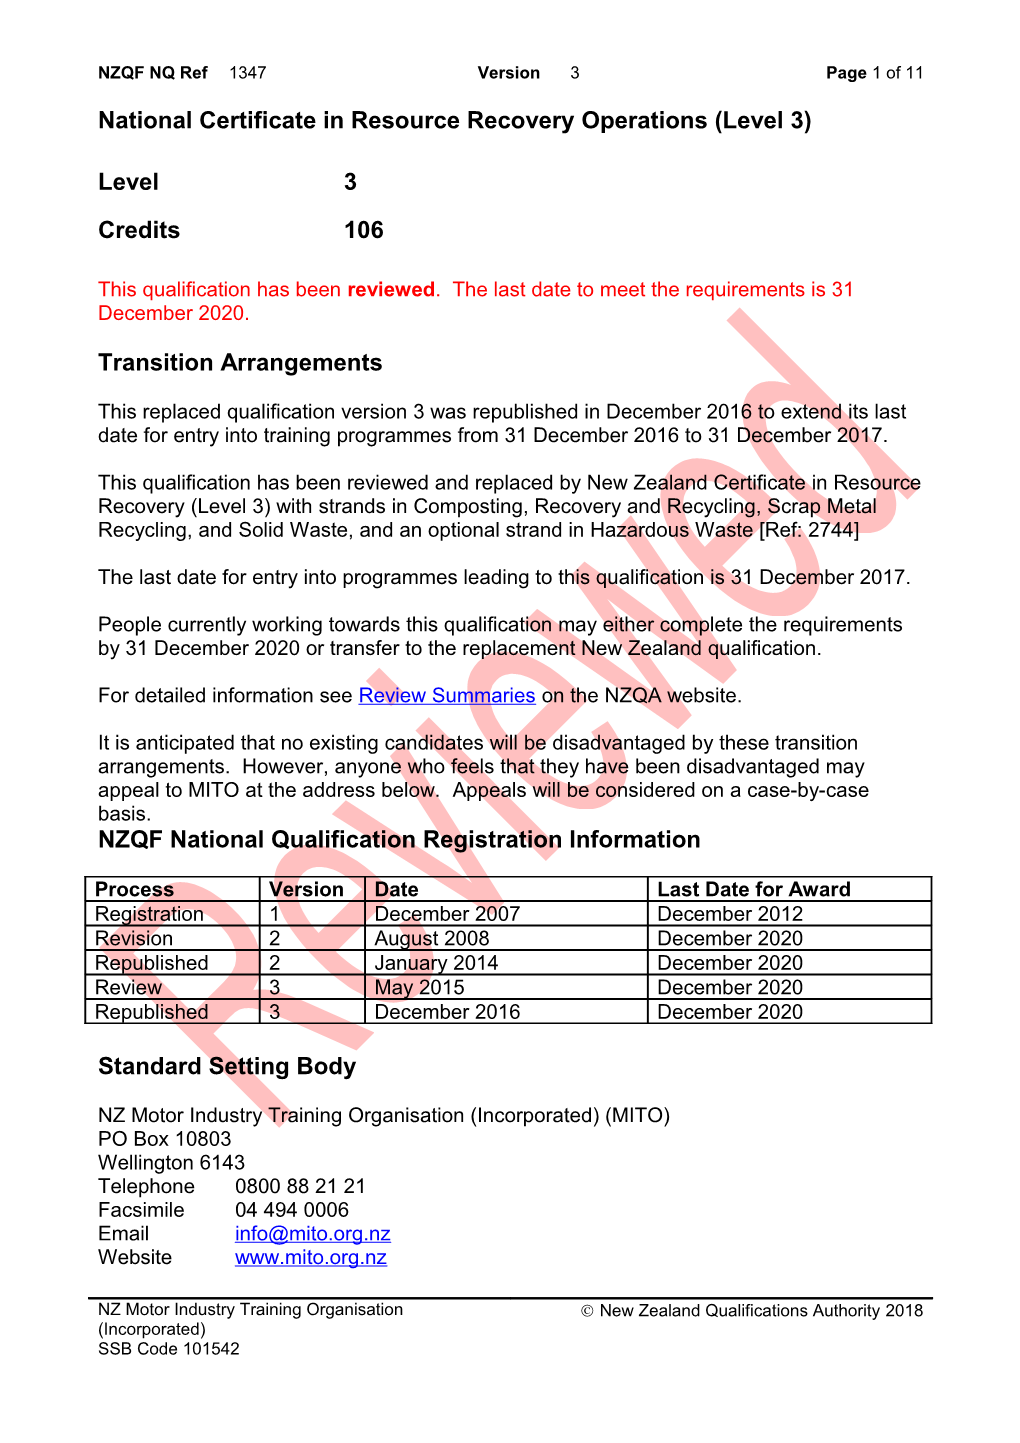 1347 National Certificate in Resource Recovery Operations (Level 3)